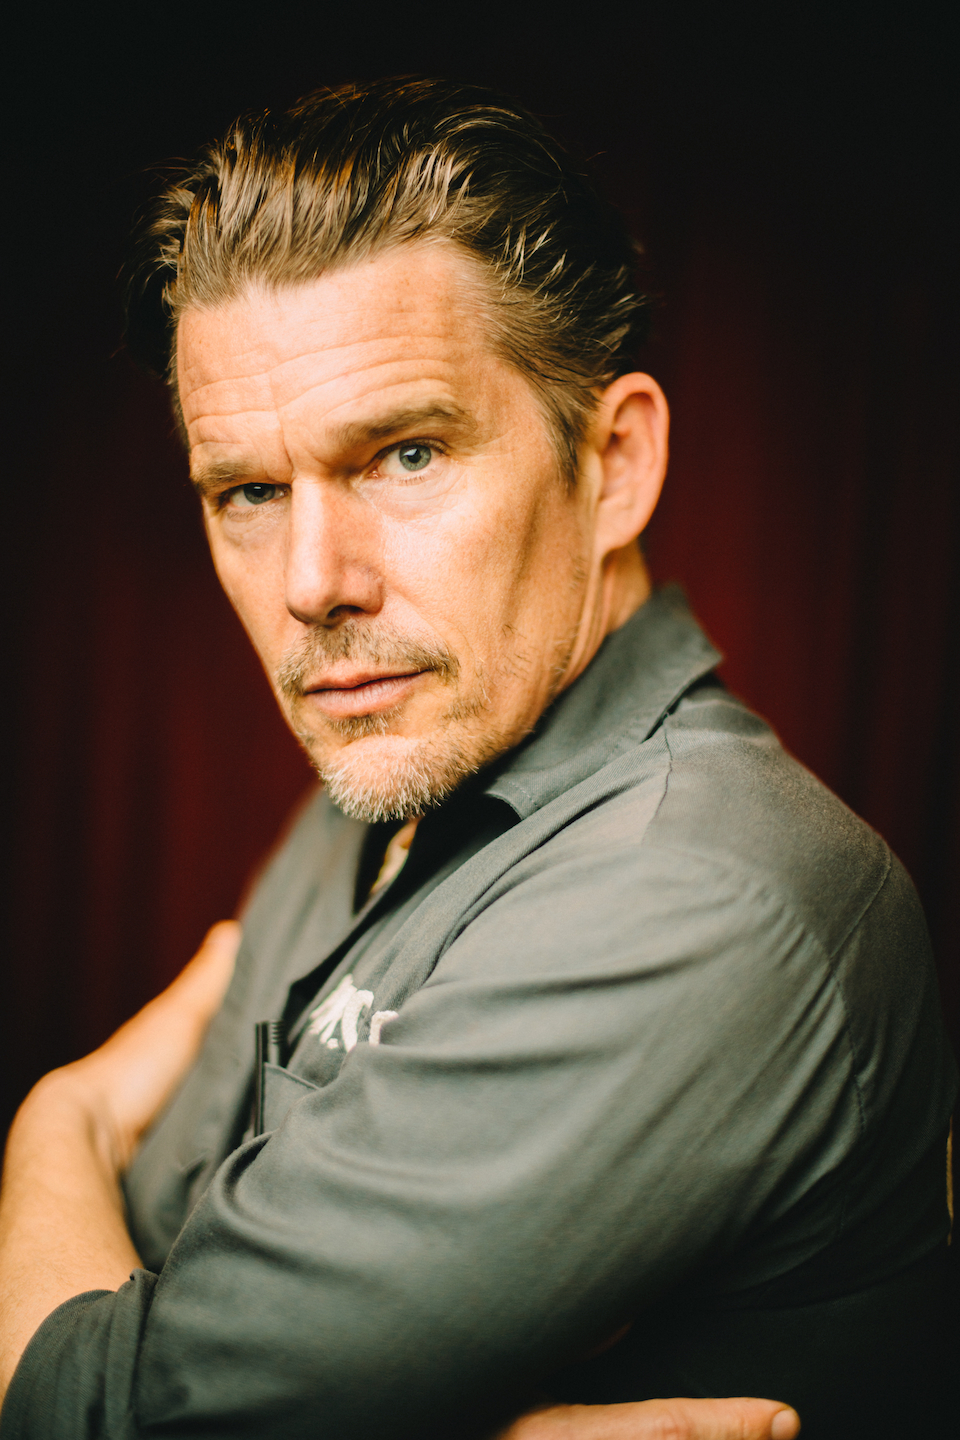 Ethan Hawke. Photo by Matt Winkelmeyer/Contour by Getty Images for SXSW